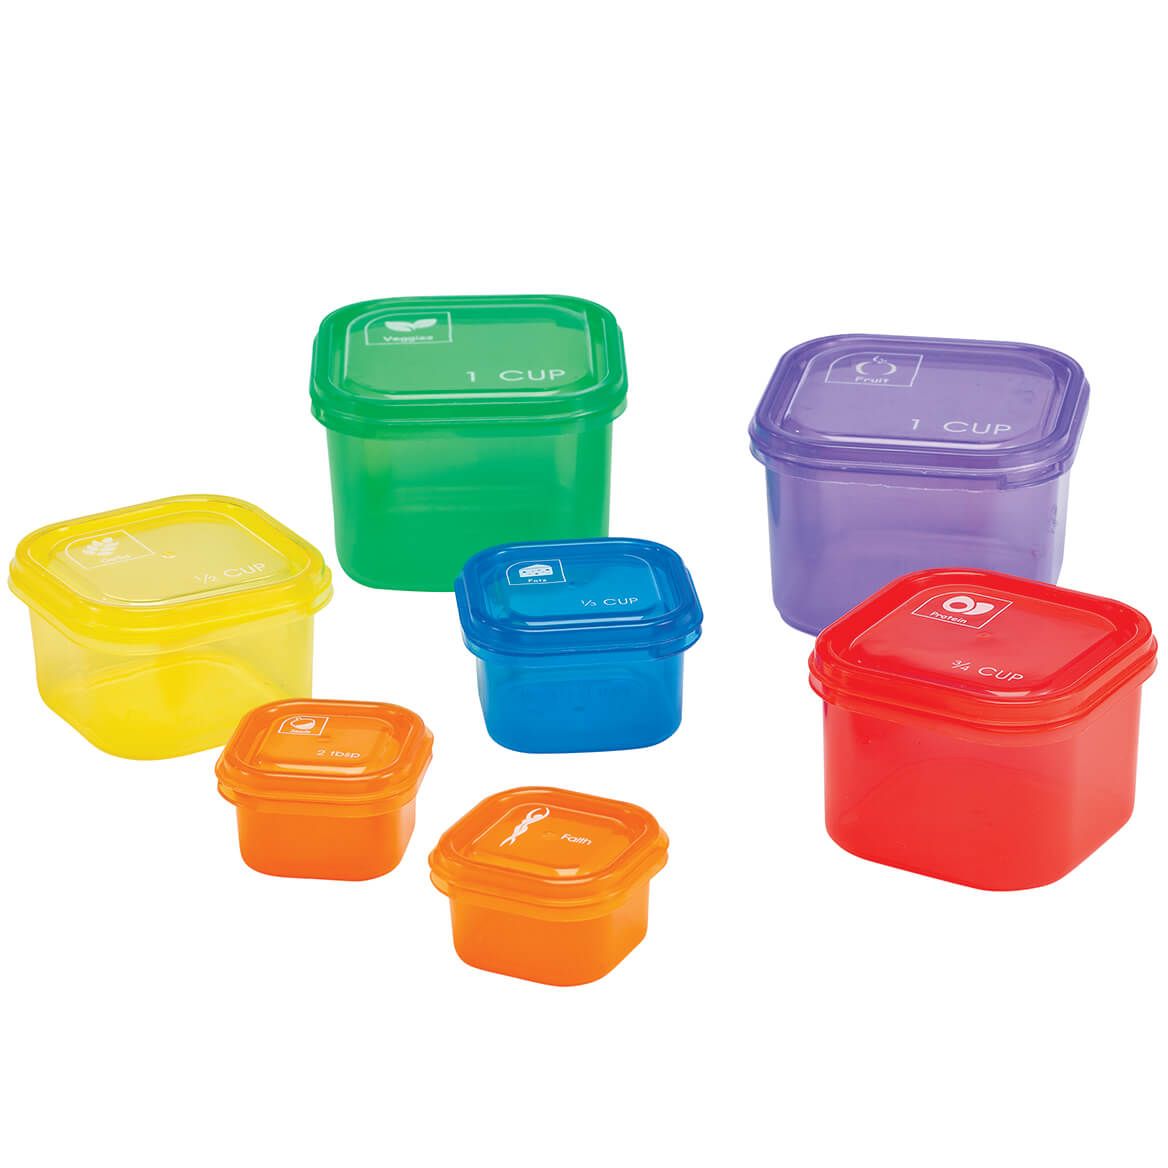 Colorful Nutritional Portion Containers, Set of 7 + '-' + 372354